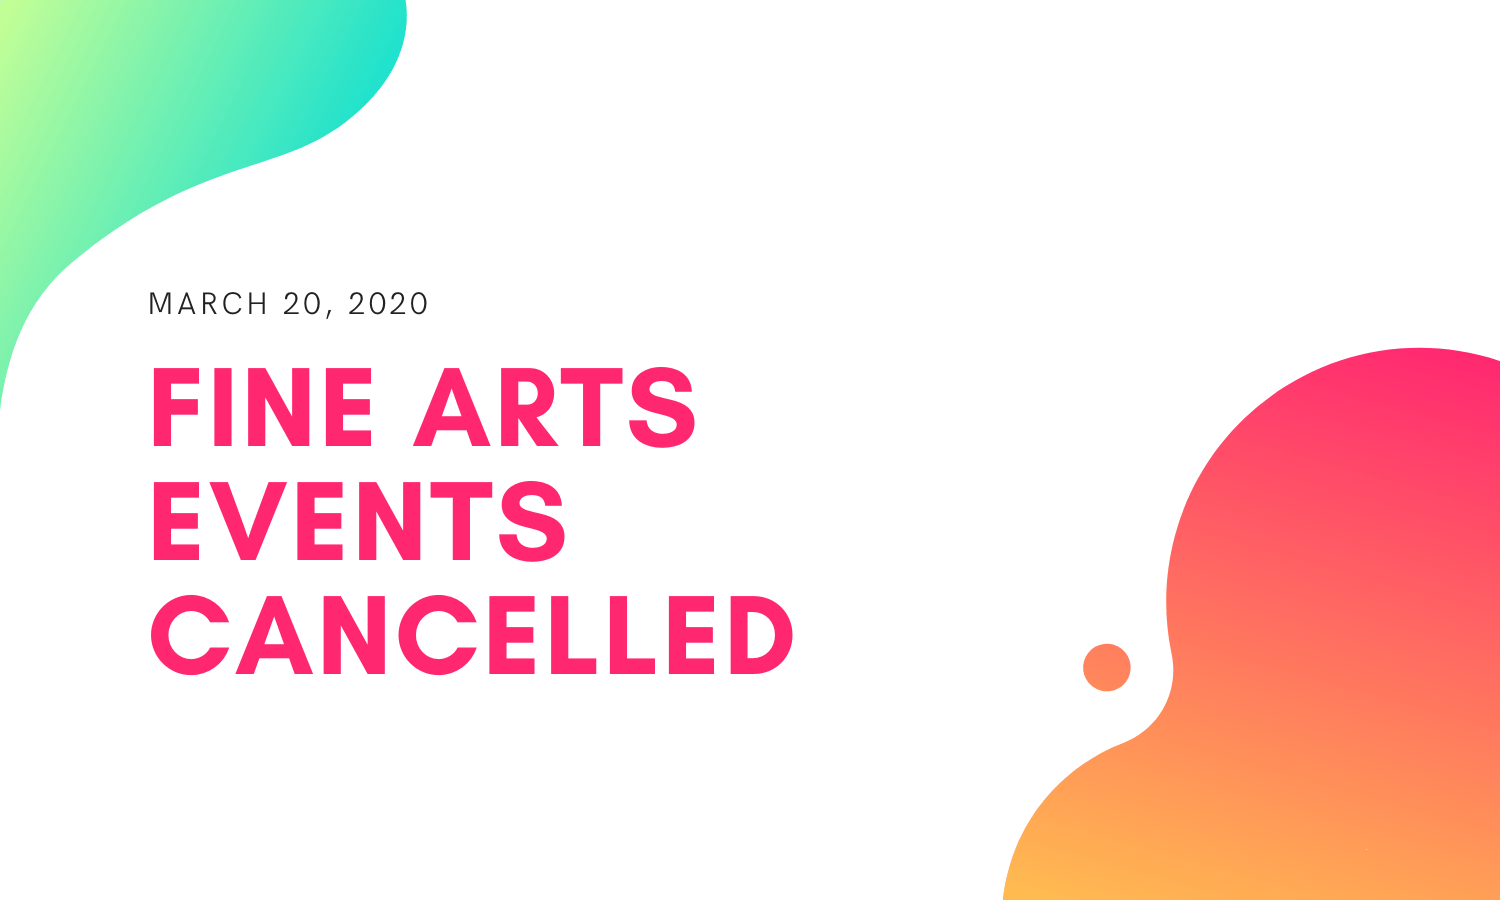 Fine Arts Events CANCELLED through April 3rd